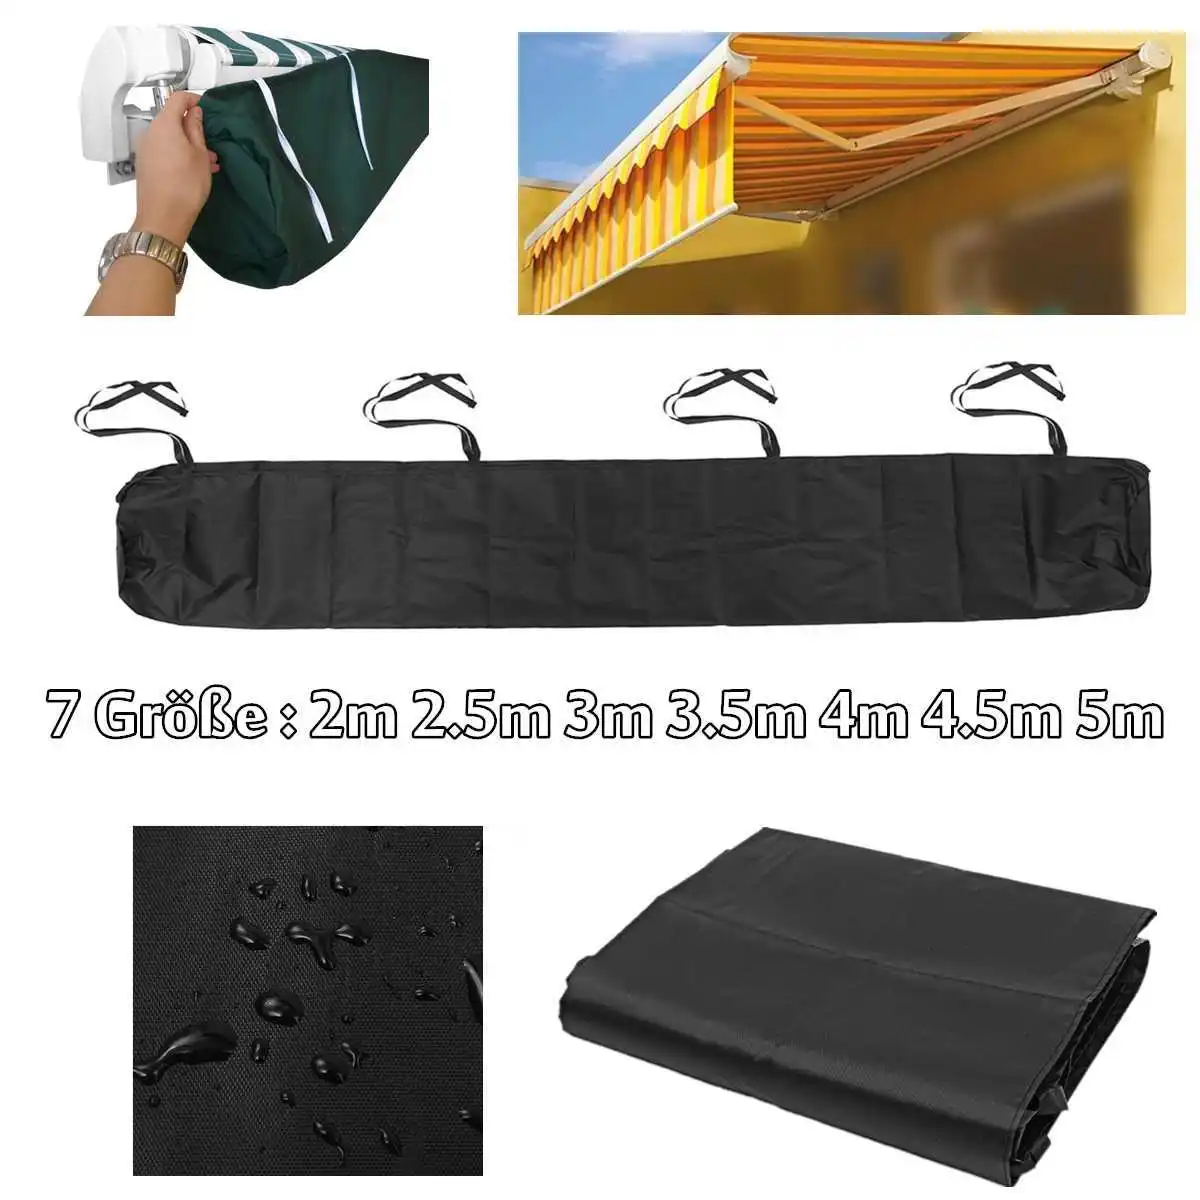 Outdoor Patio Awning Waterproof Cover Telescopic Rolling Curtain Waterproof Cover Dust Protection Cover